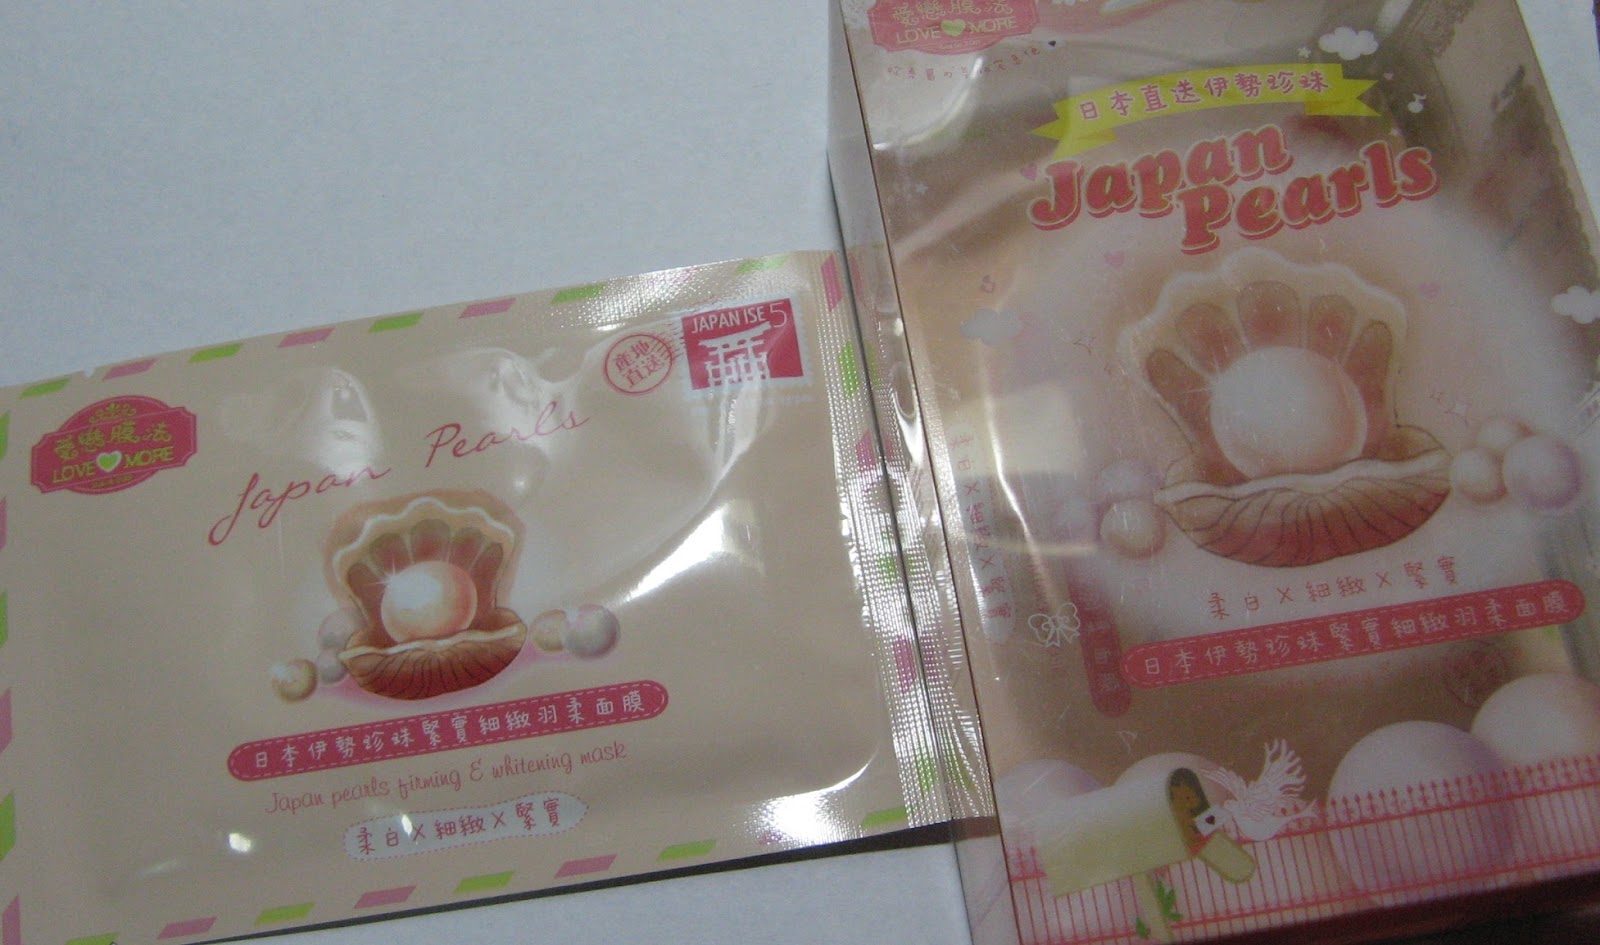 Review : Love More Japan Pearls Firming and Whitening Mask - Review Galore